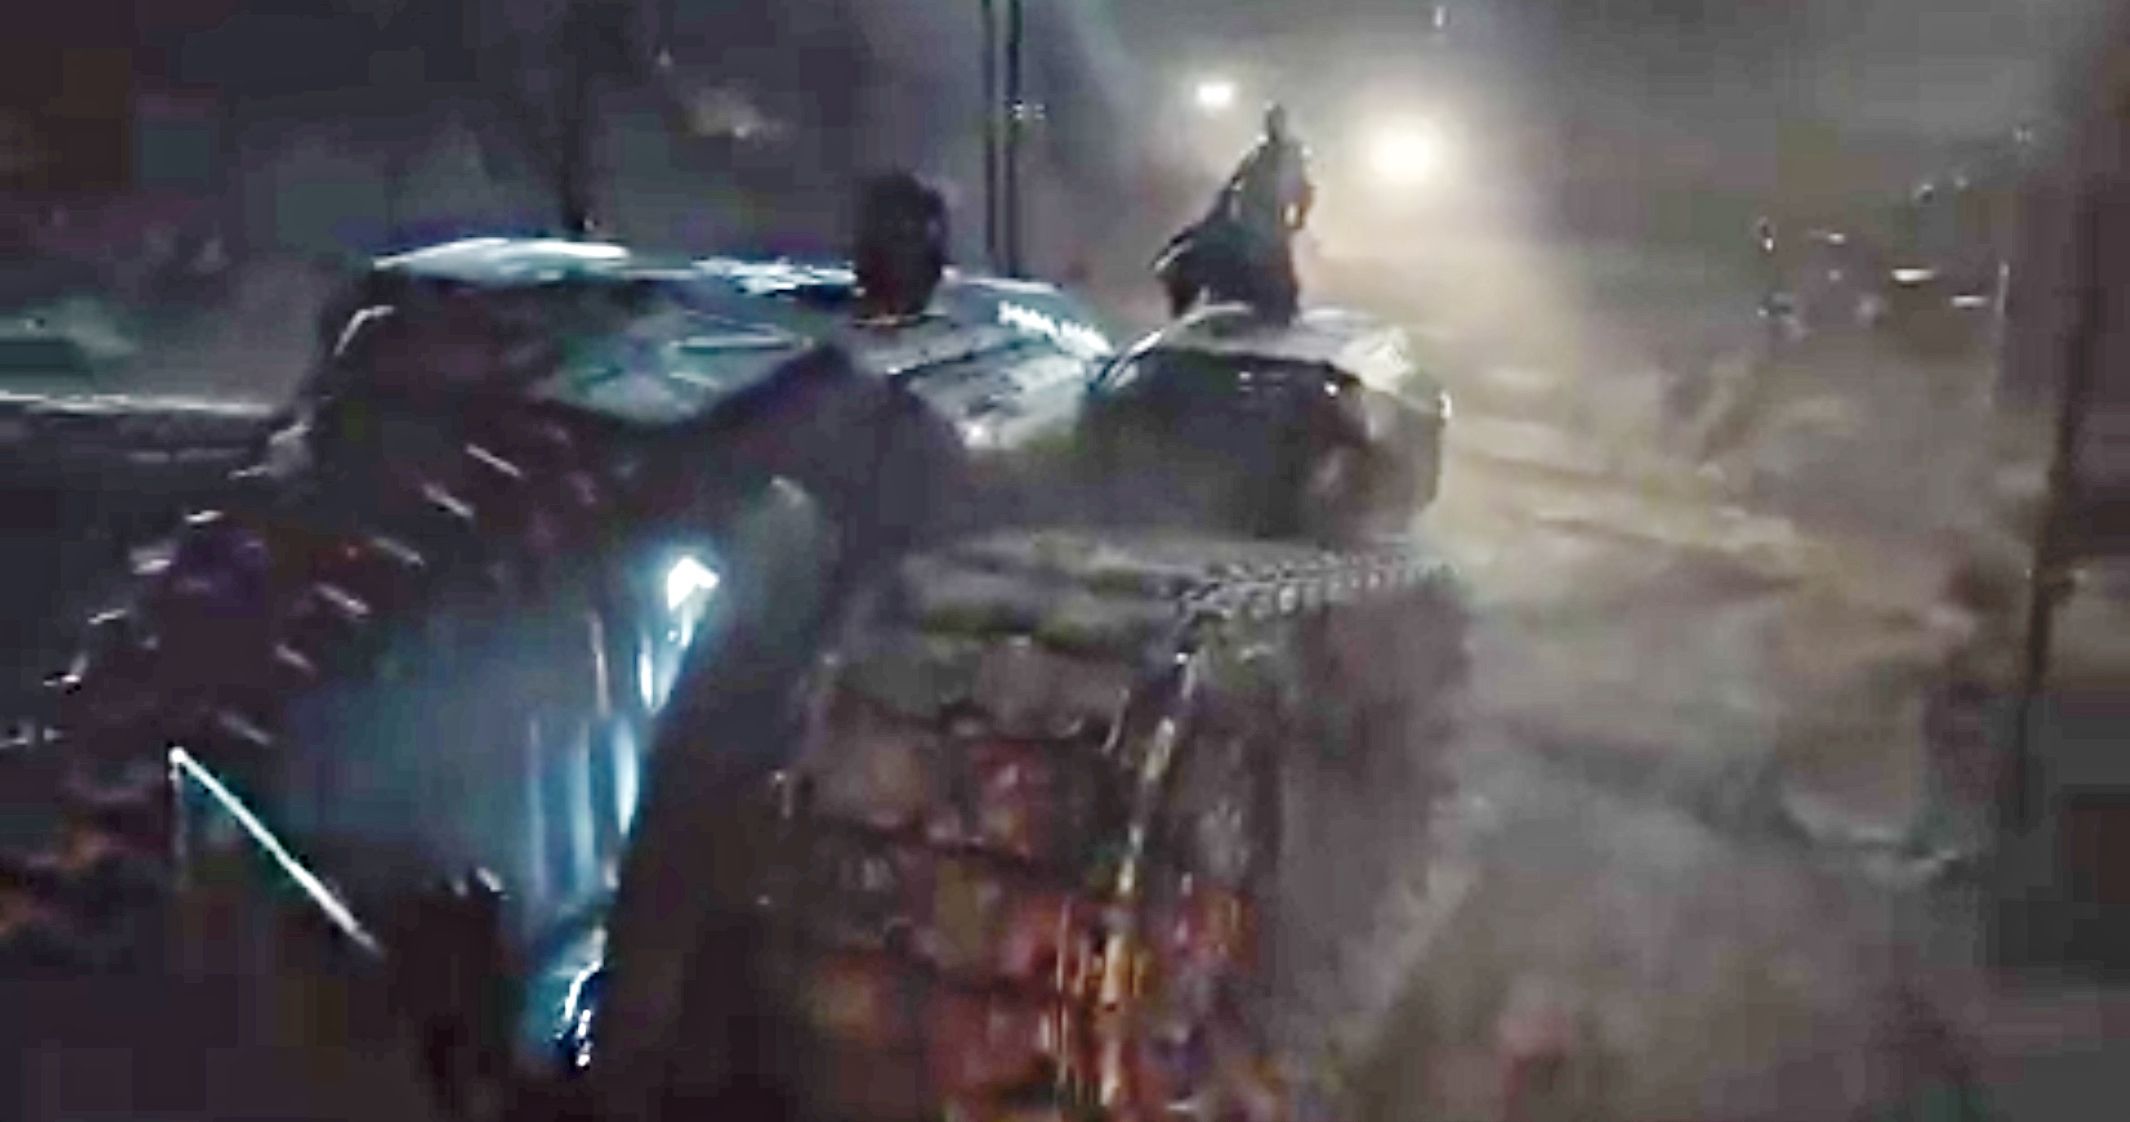 Final Snyder Cut Teaser Brings in Batman's Tank and Plenty of Action